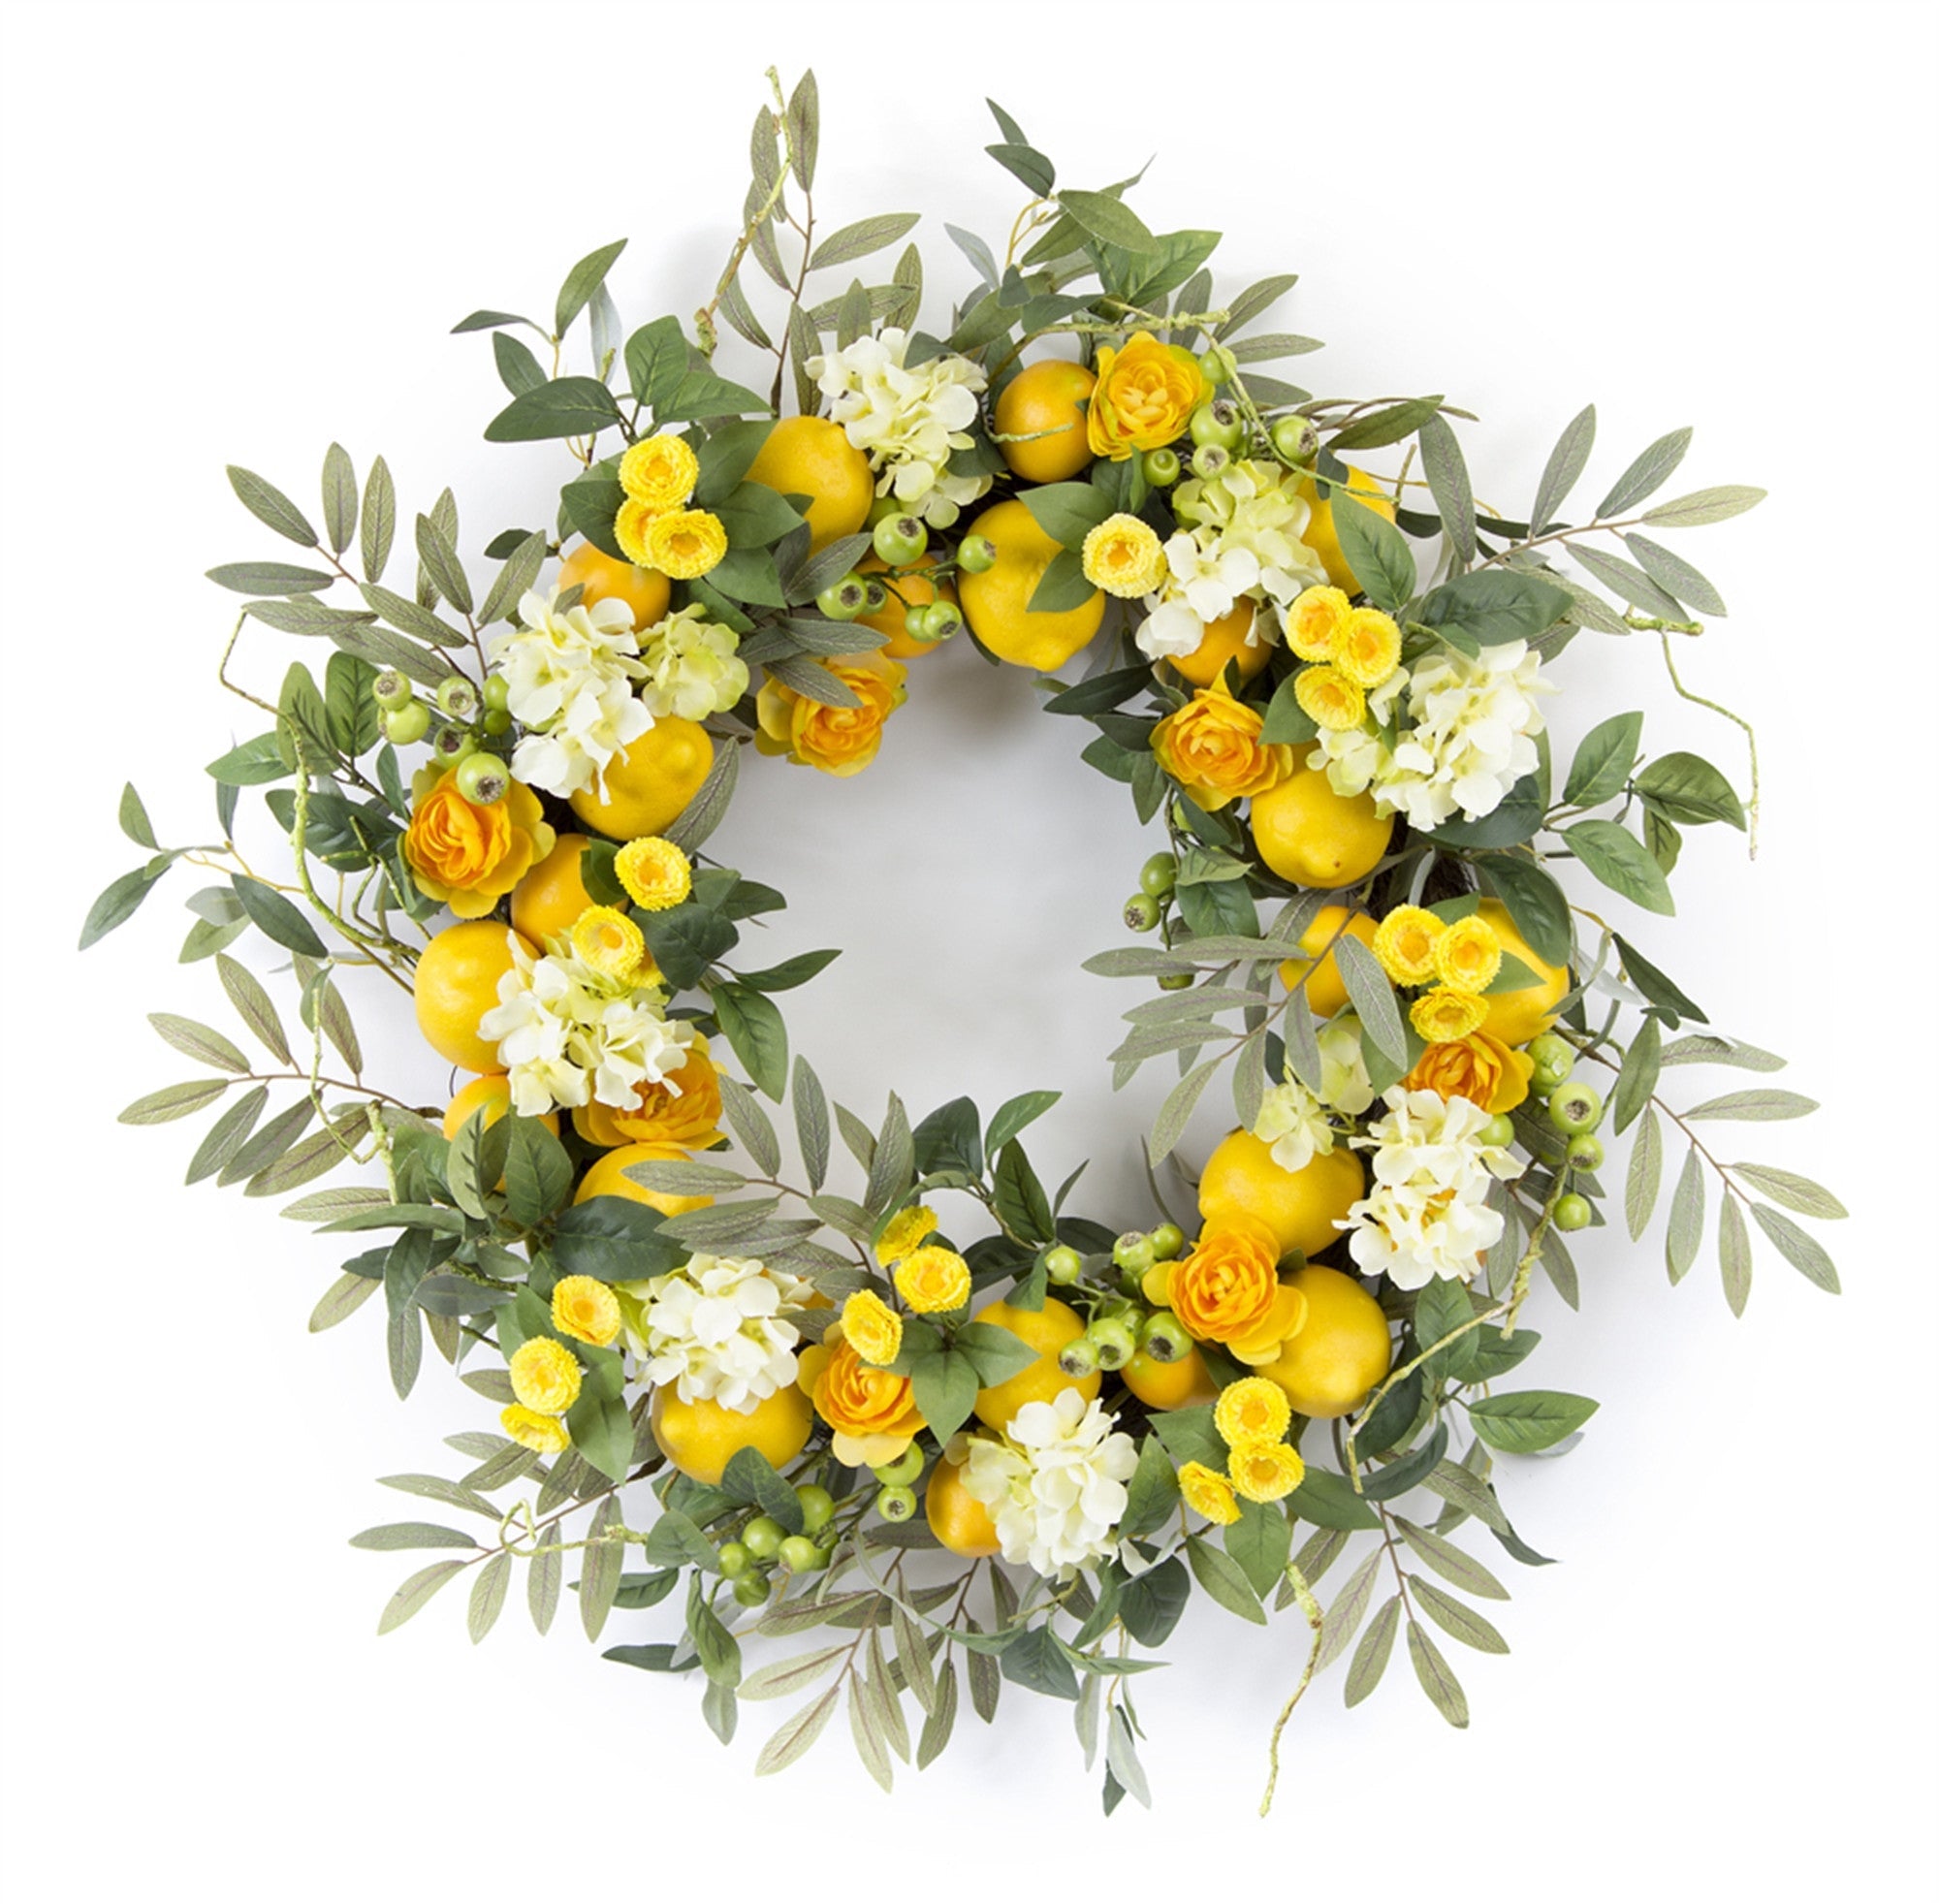 28" Green and Yellow Artificial Summer Lemon Wreath - Tuesday Morning-Wreaths